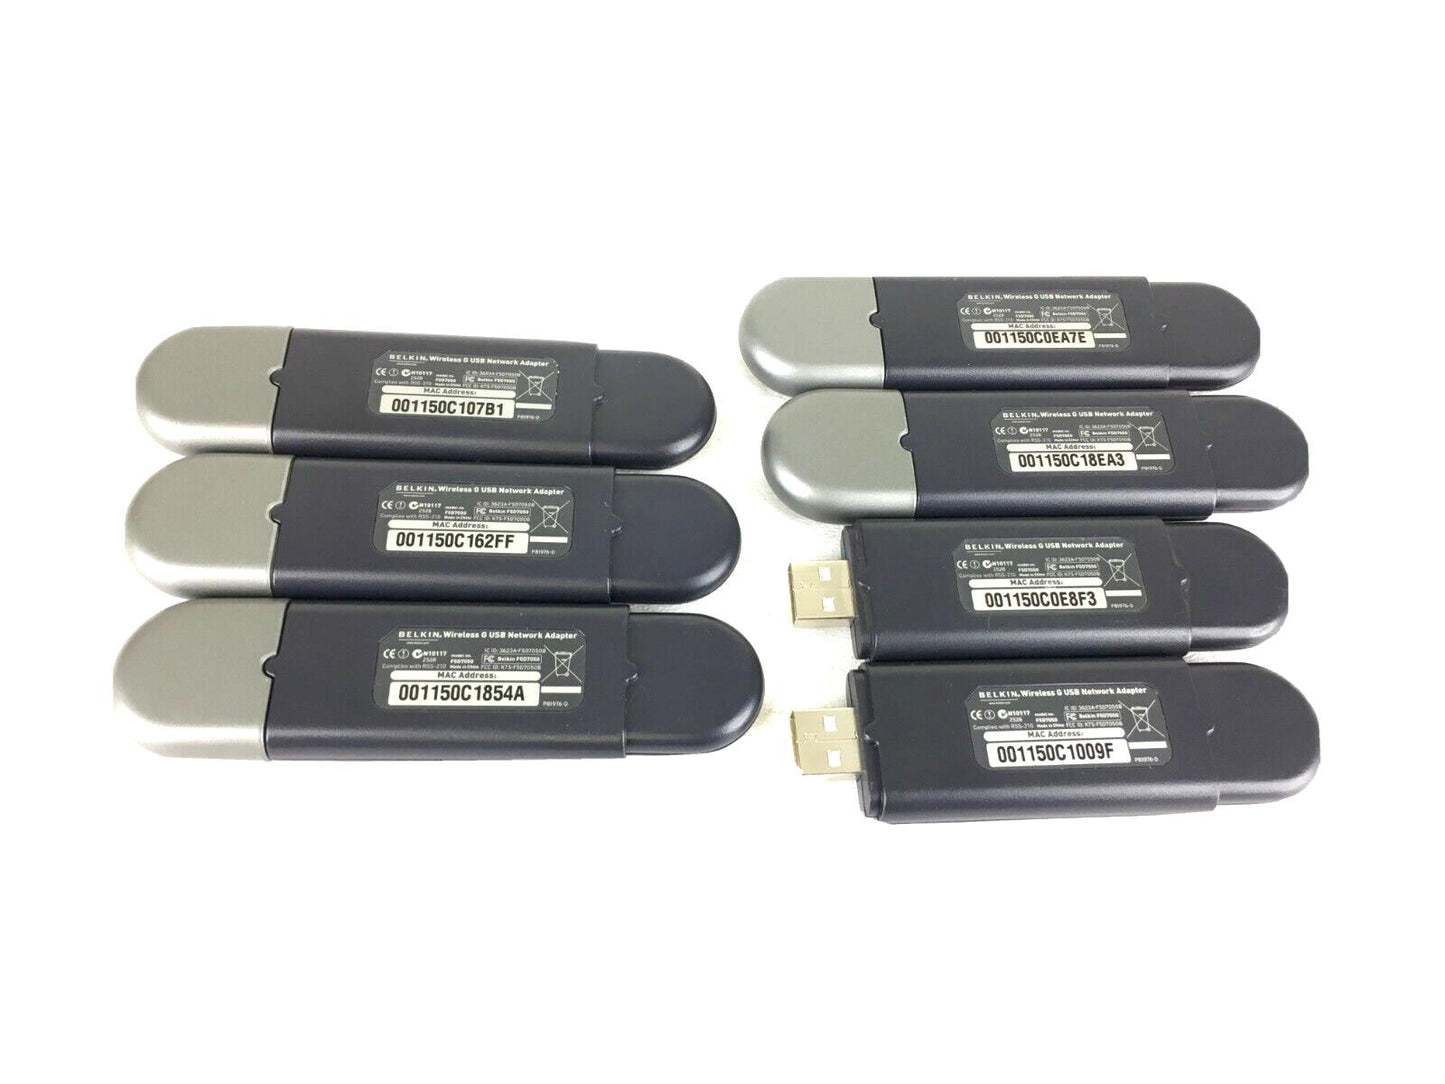 LOT OF 7 BELKIN 802.11g-54 Mbps Wireless G USB Network Adapter F5D7050-TESTED